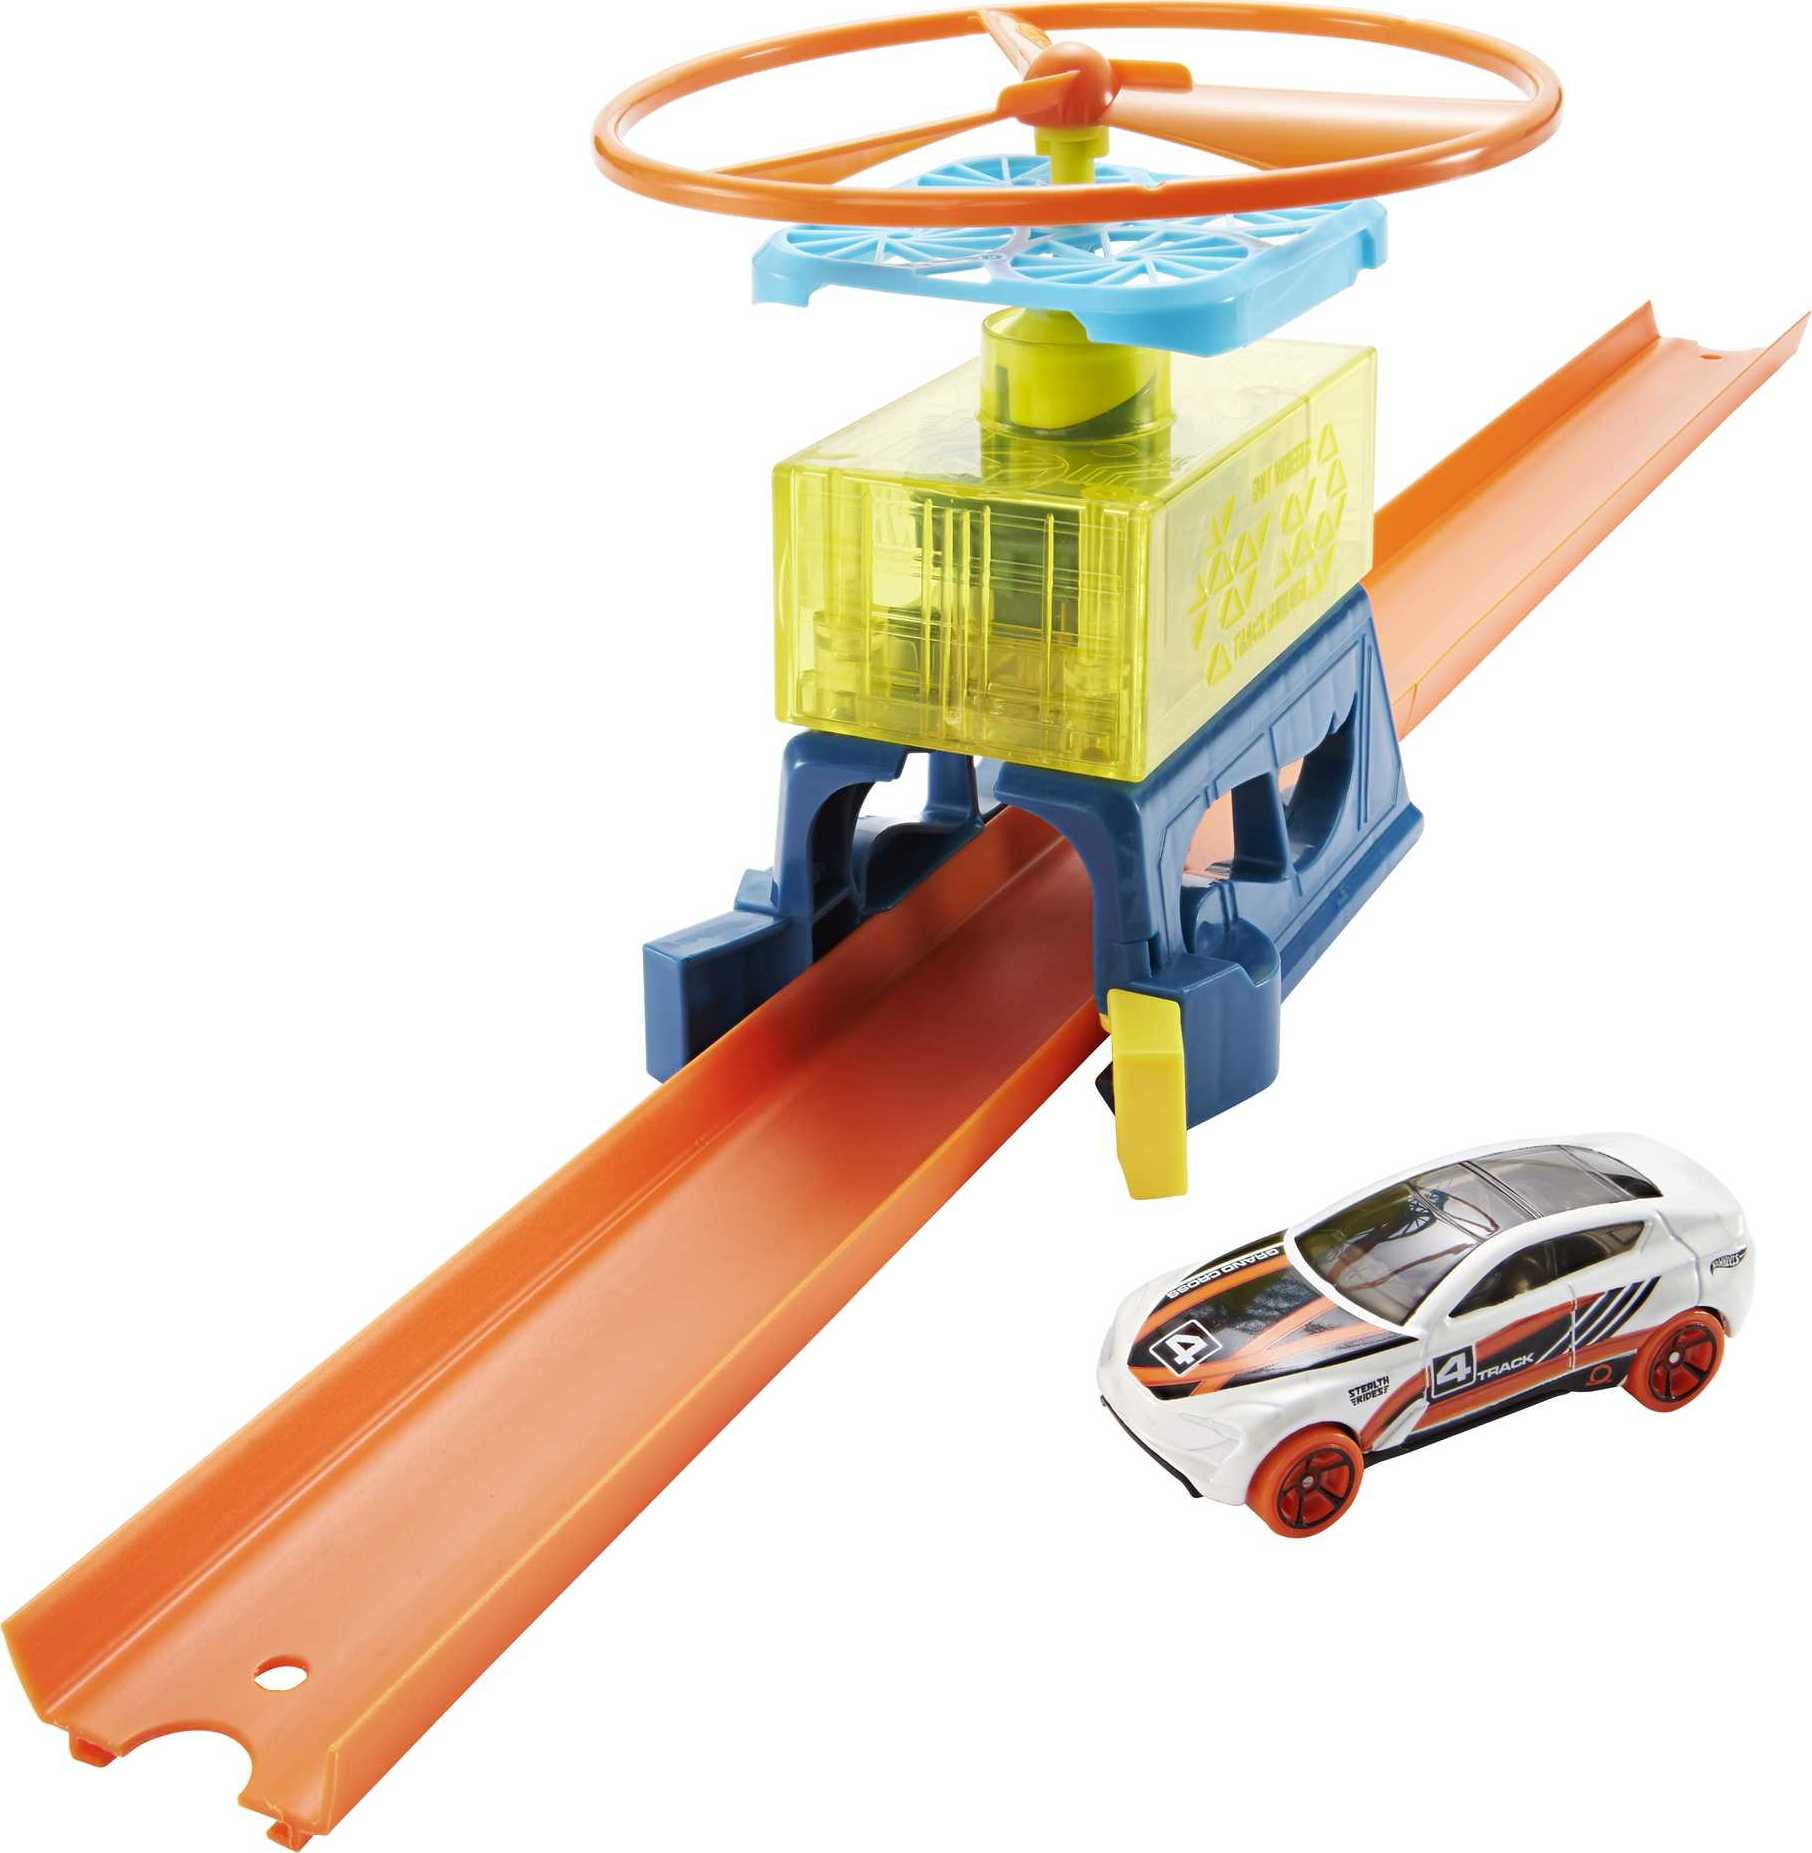 2 Hot Wheels Track Builder System Switch It Vehicle Diverter Kids Toy Gift NEW 